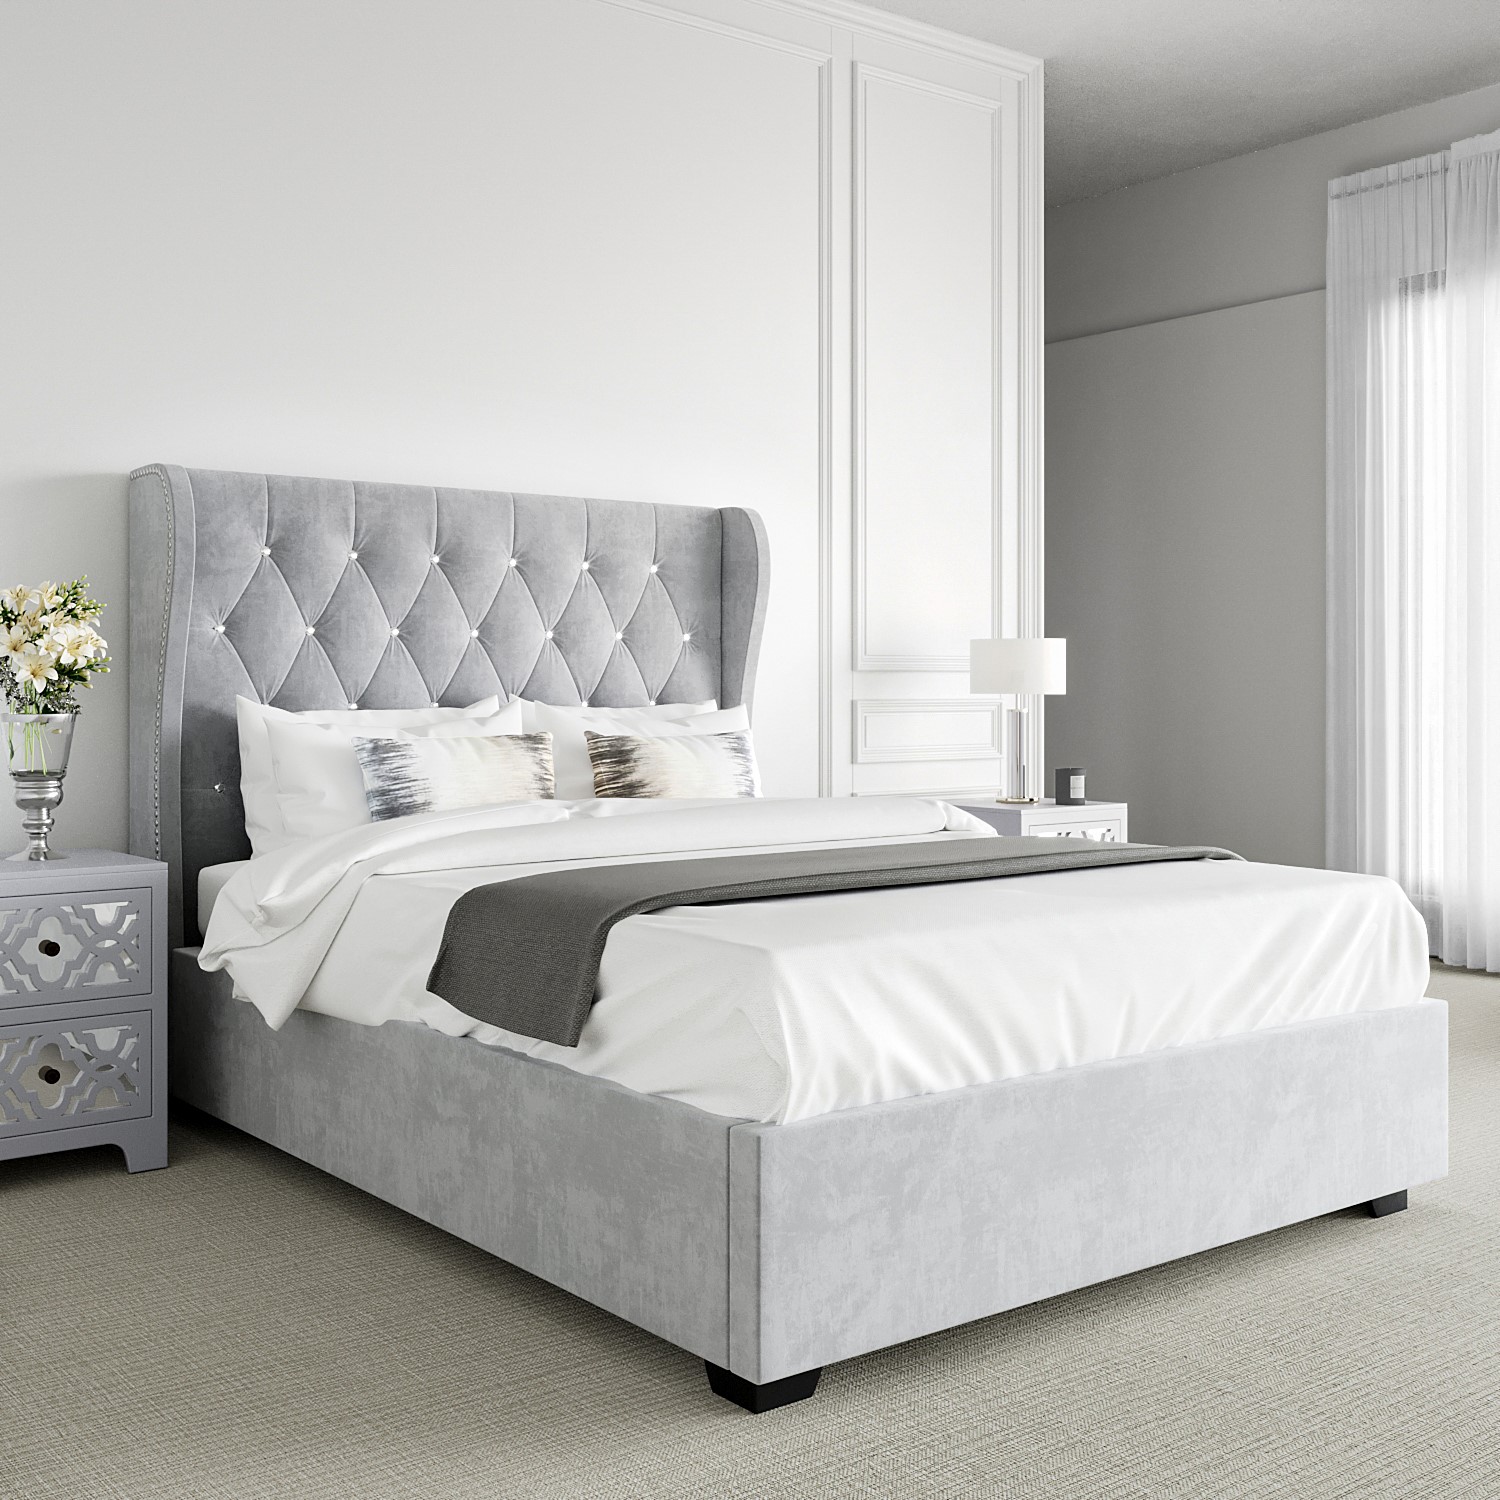 Safina Light Grey Velvet Small Double, What Size Is A Small Double Headboard